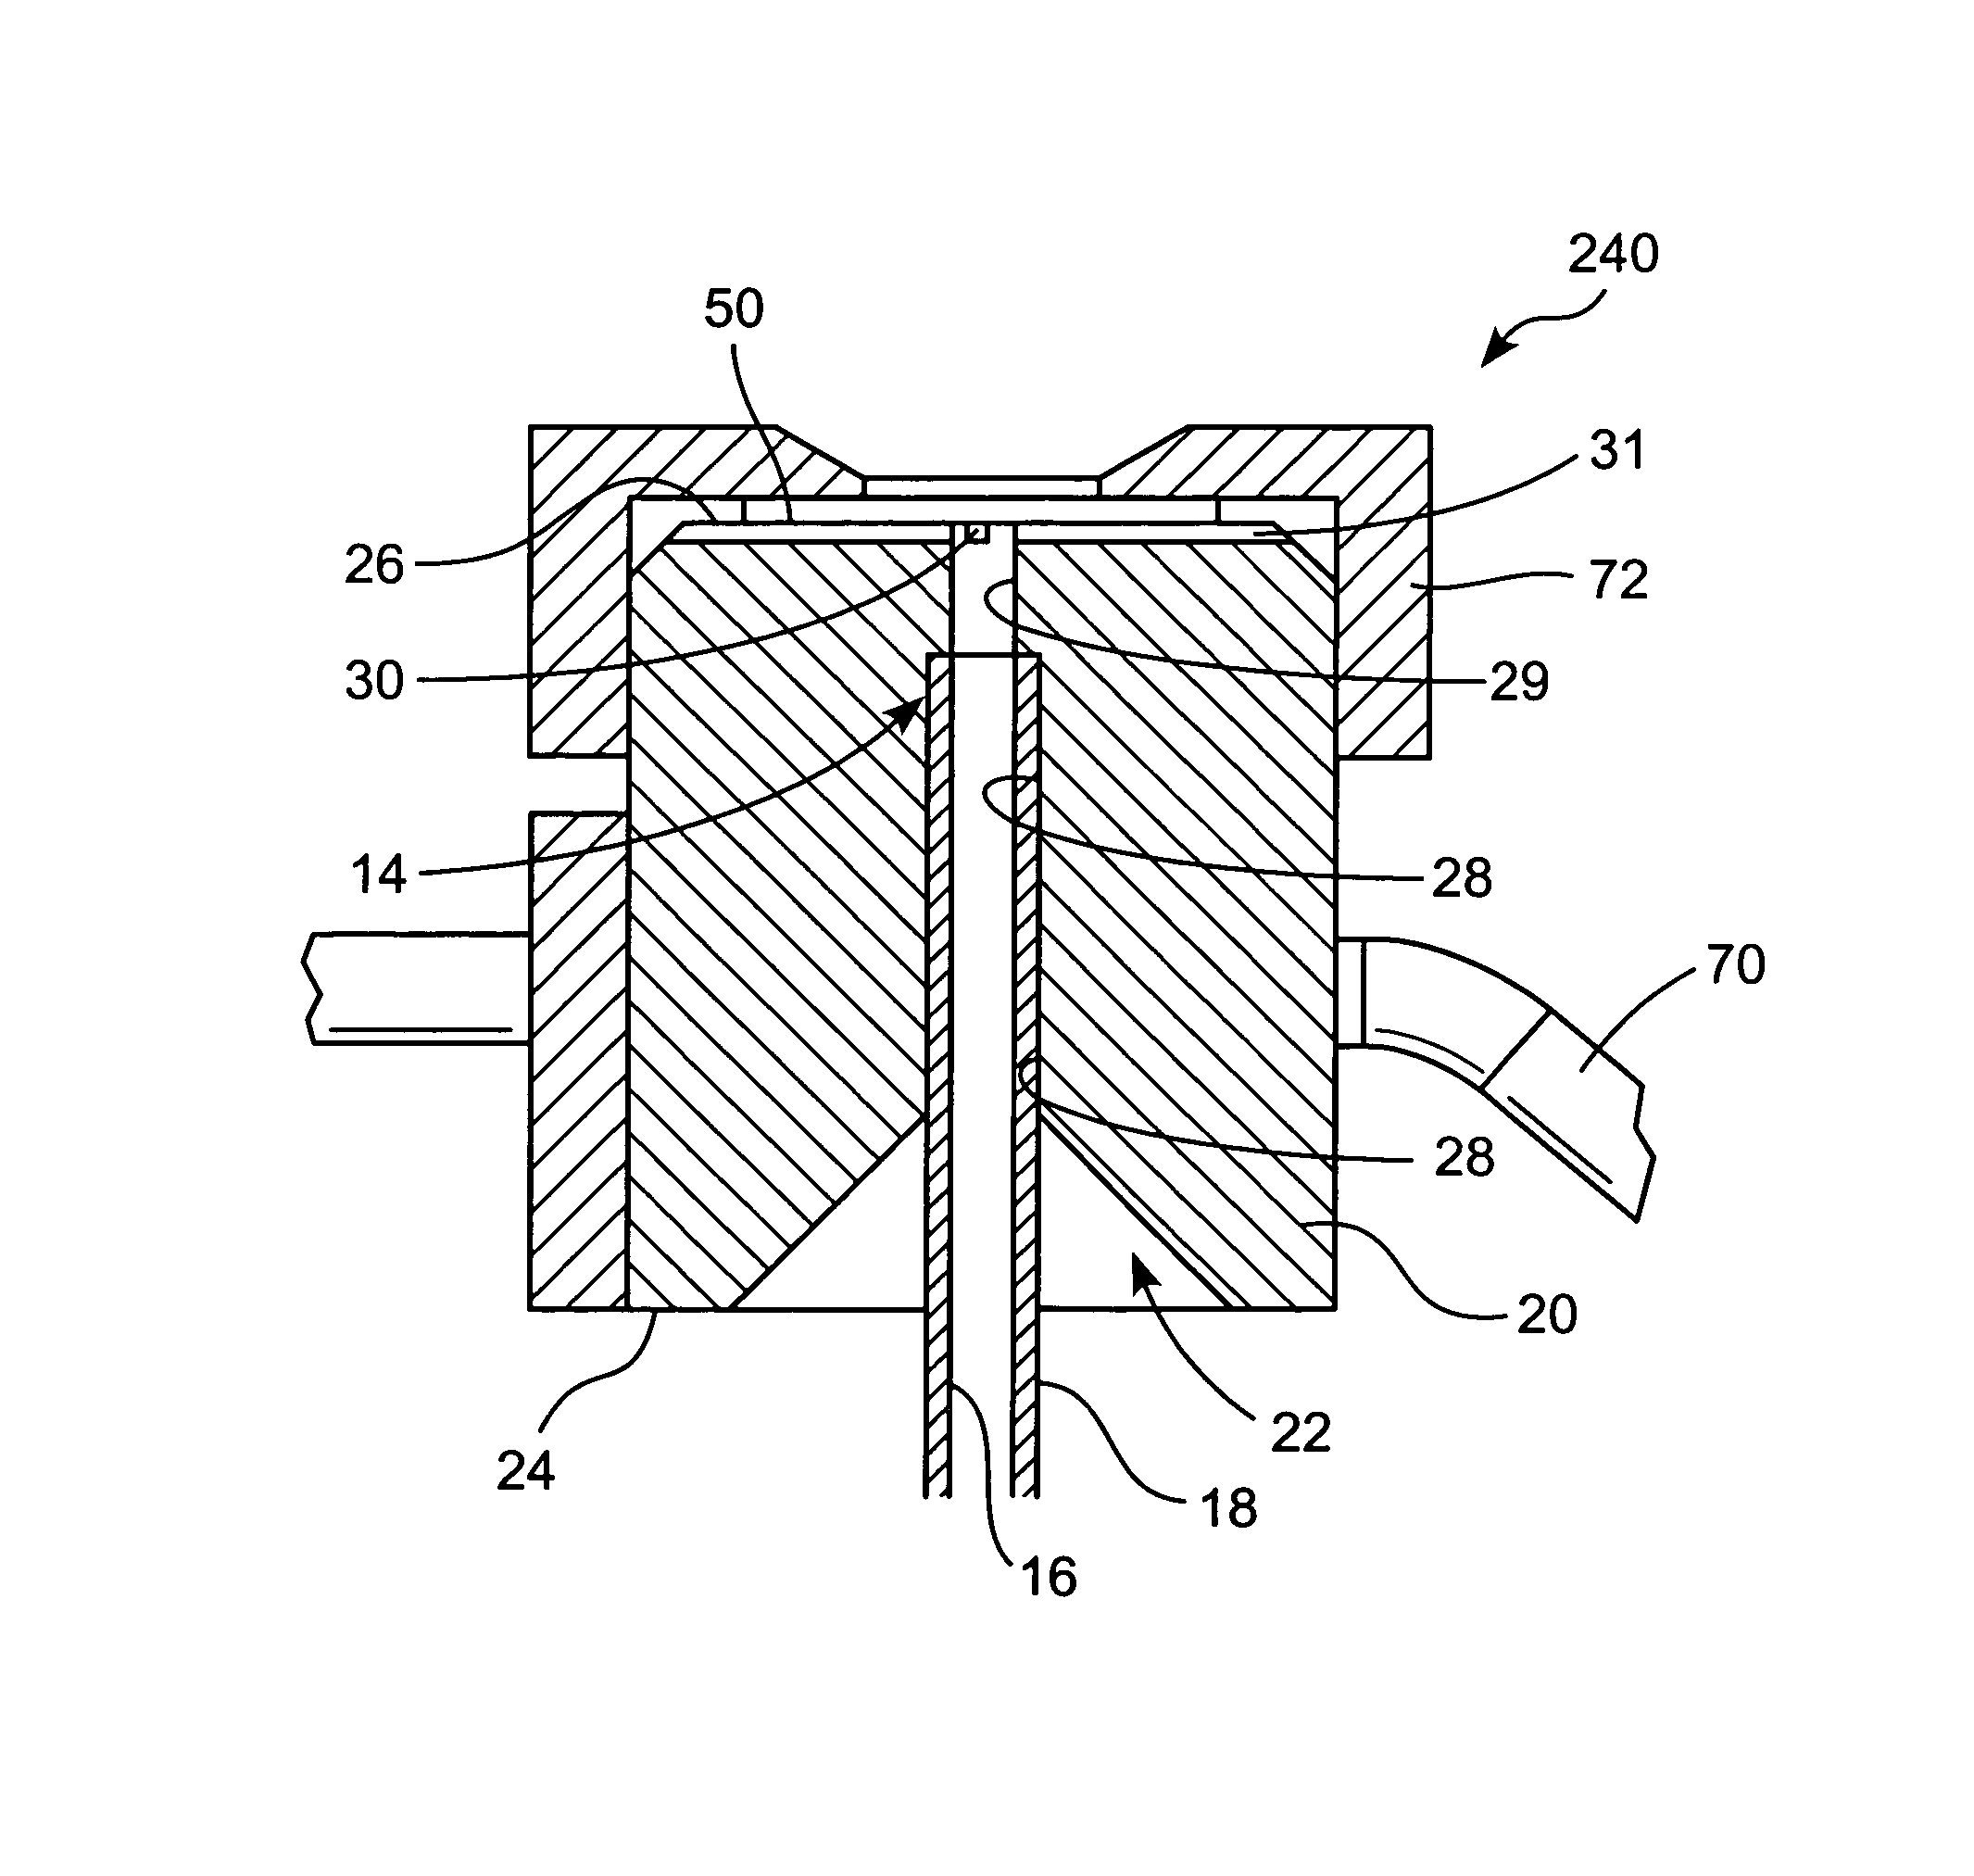 Devices and methods for facilitating fluid transport